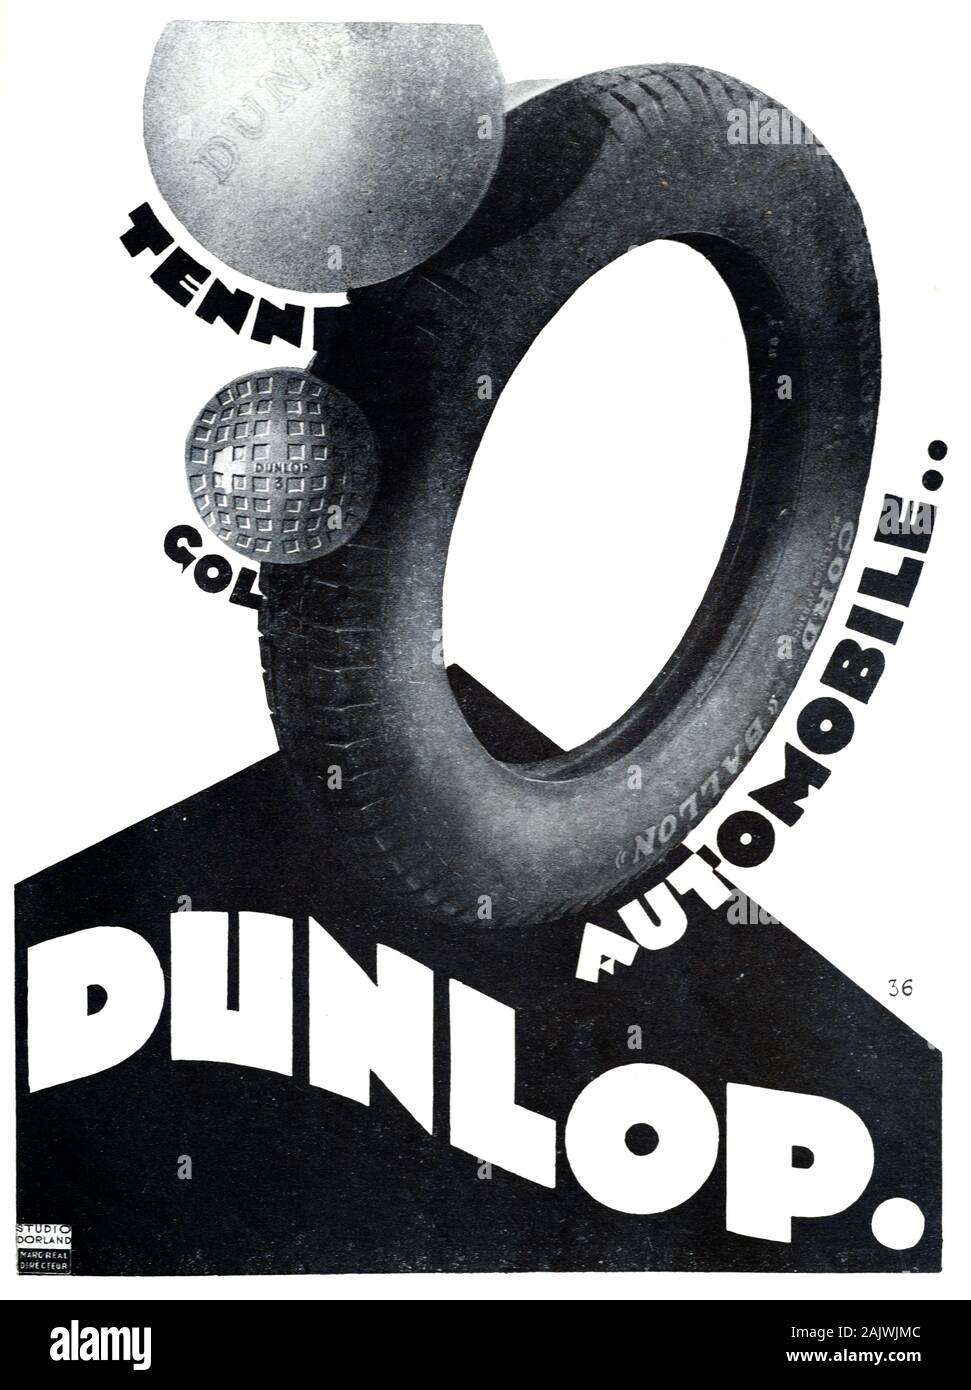 Old Advert, Vintage Advert, Advertisement or Publicity for Dunlop Tyres or Tires Advert 1927 Stock Photo